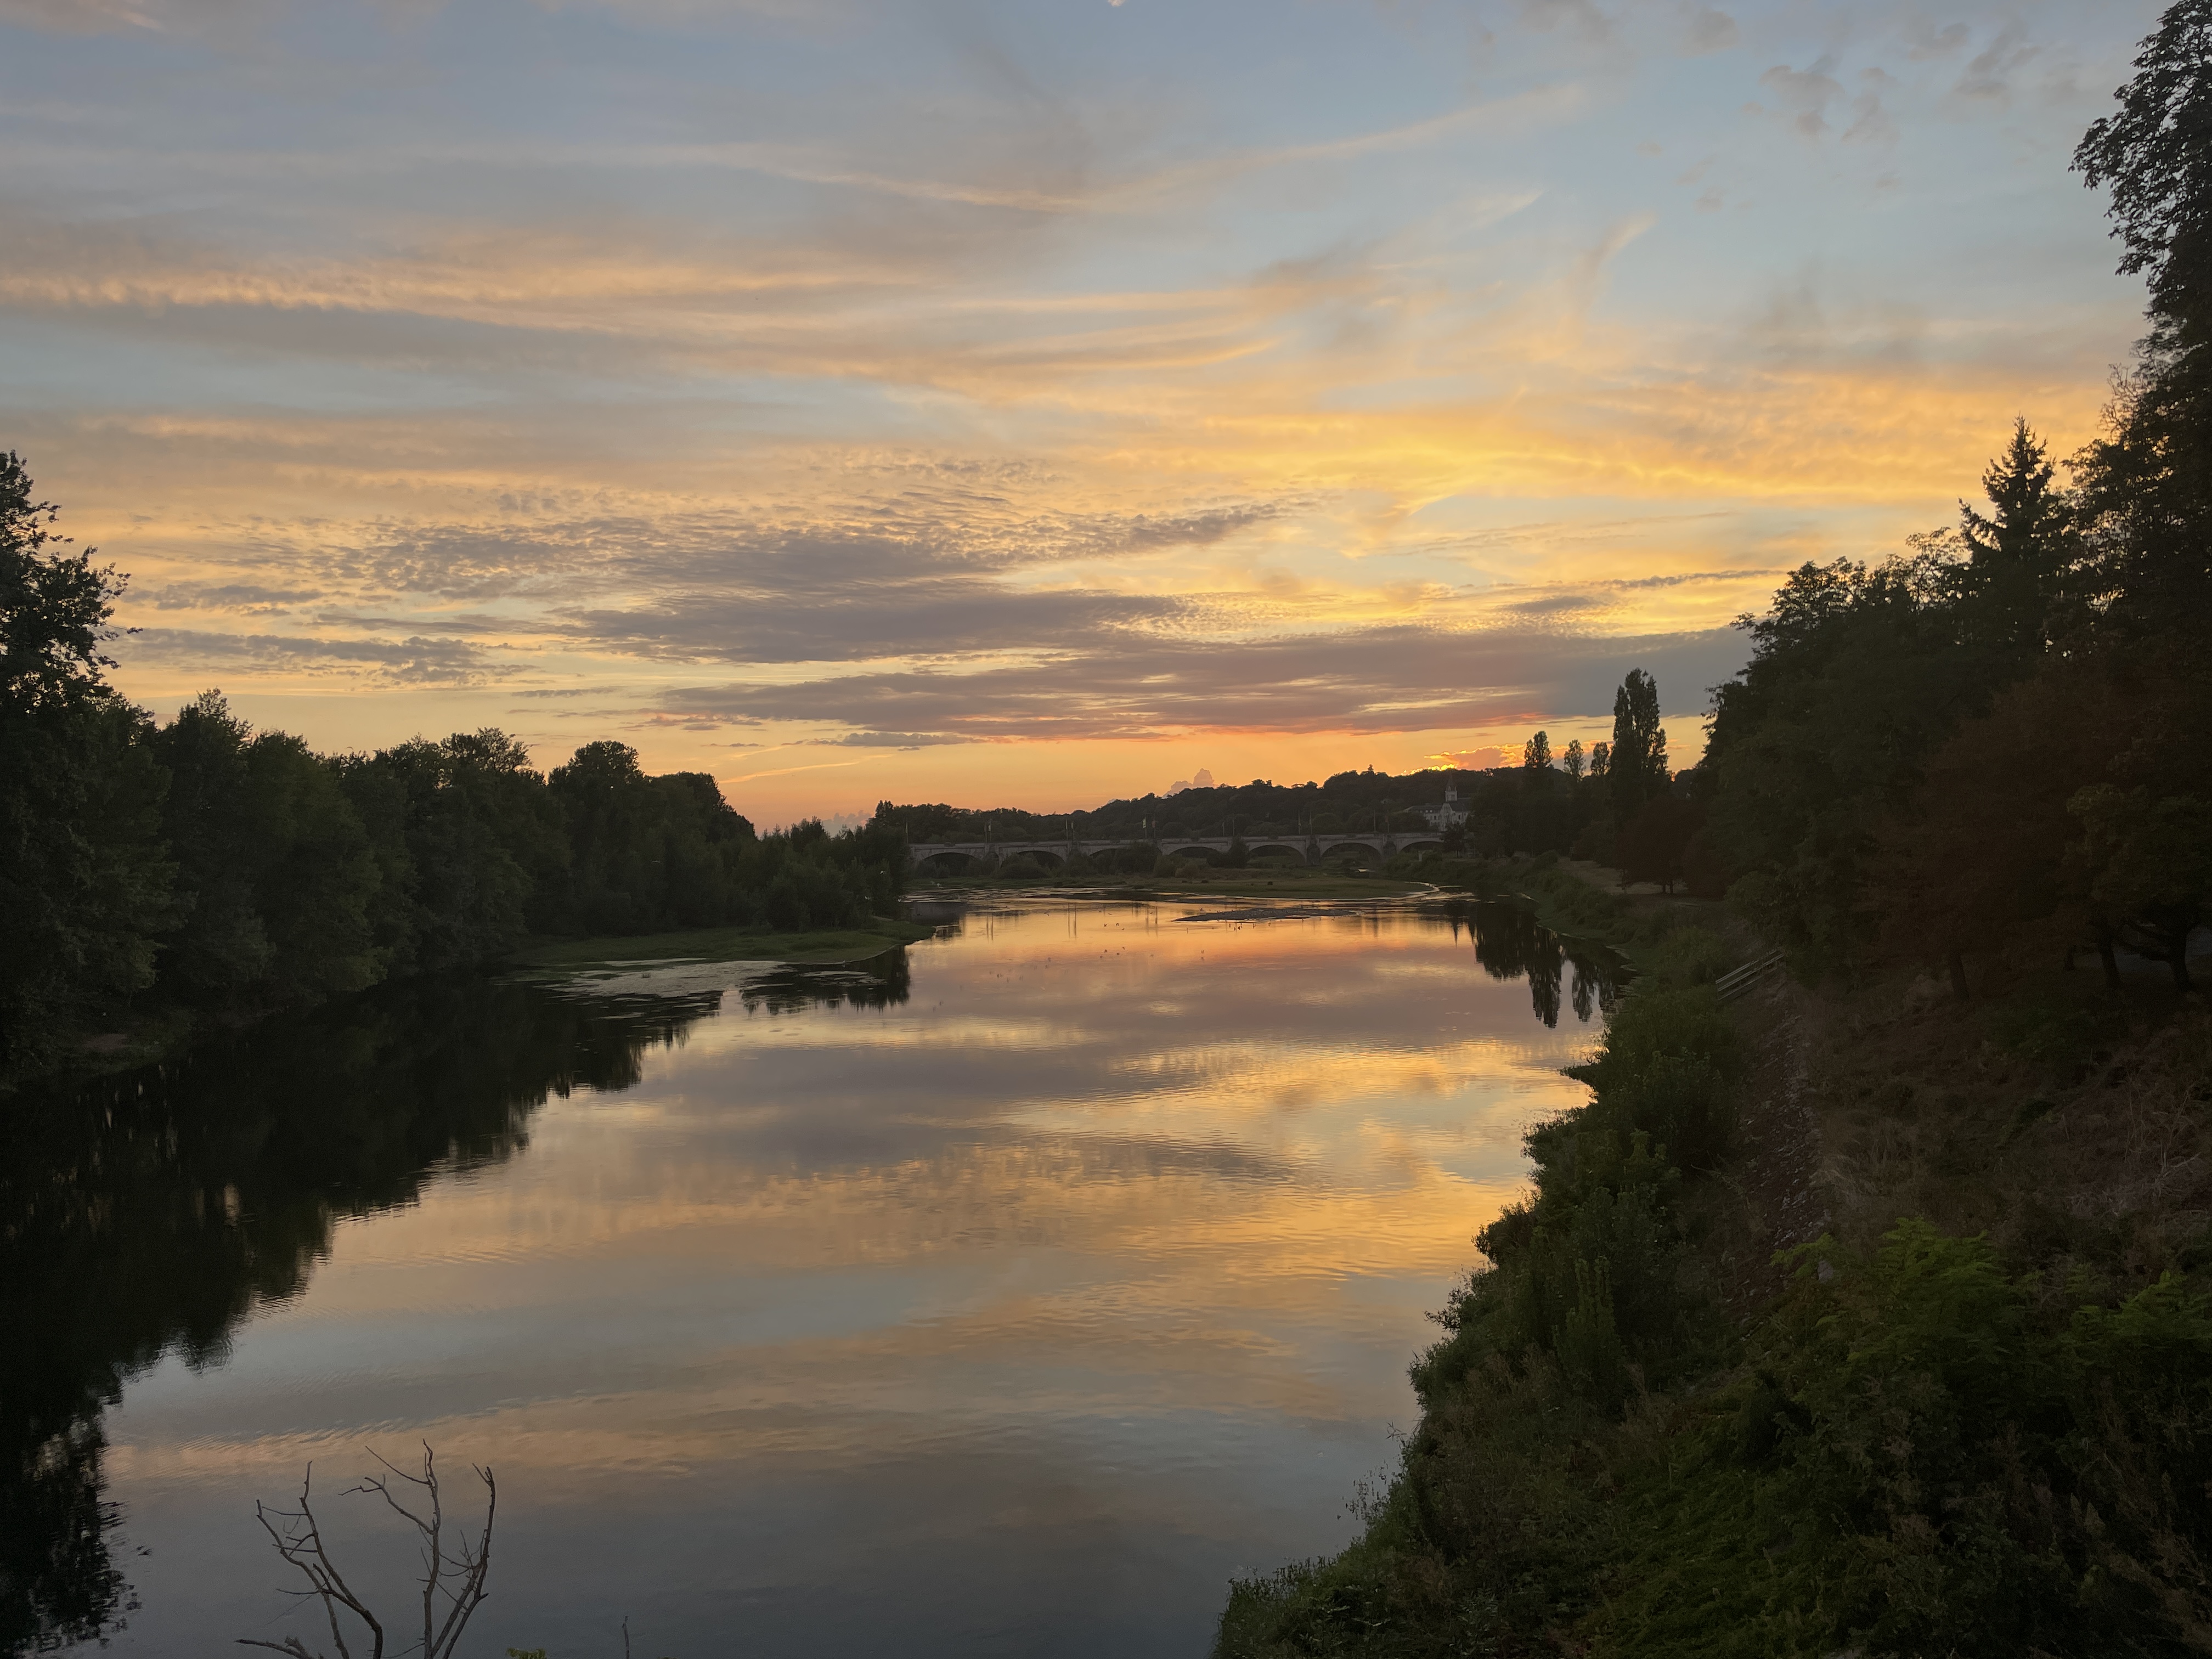 Loire river at sunset